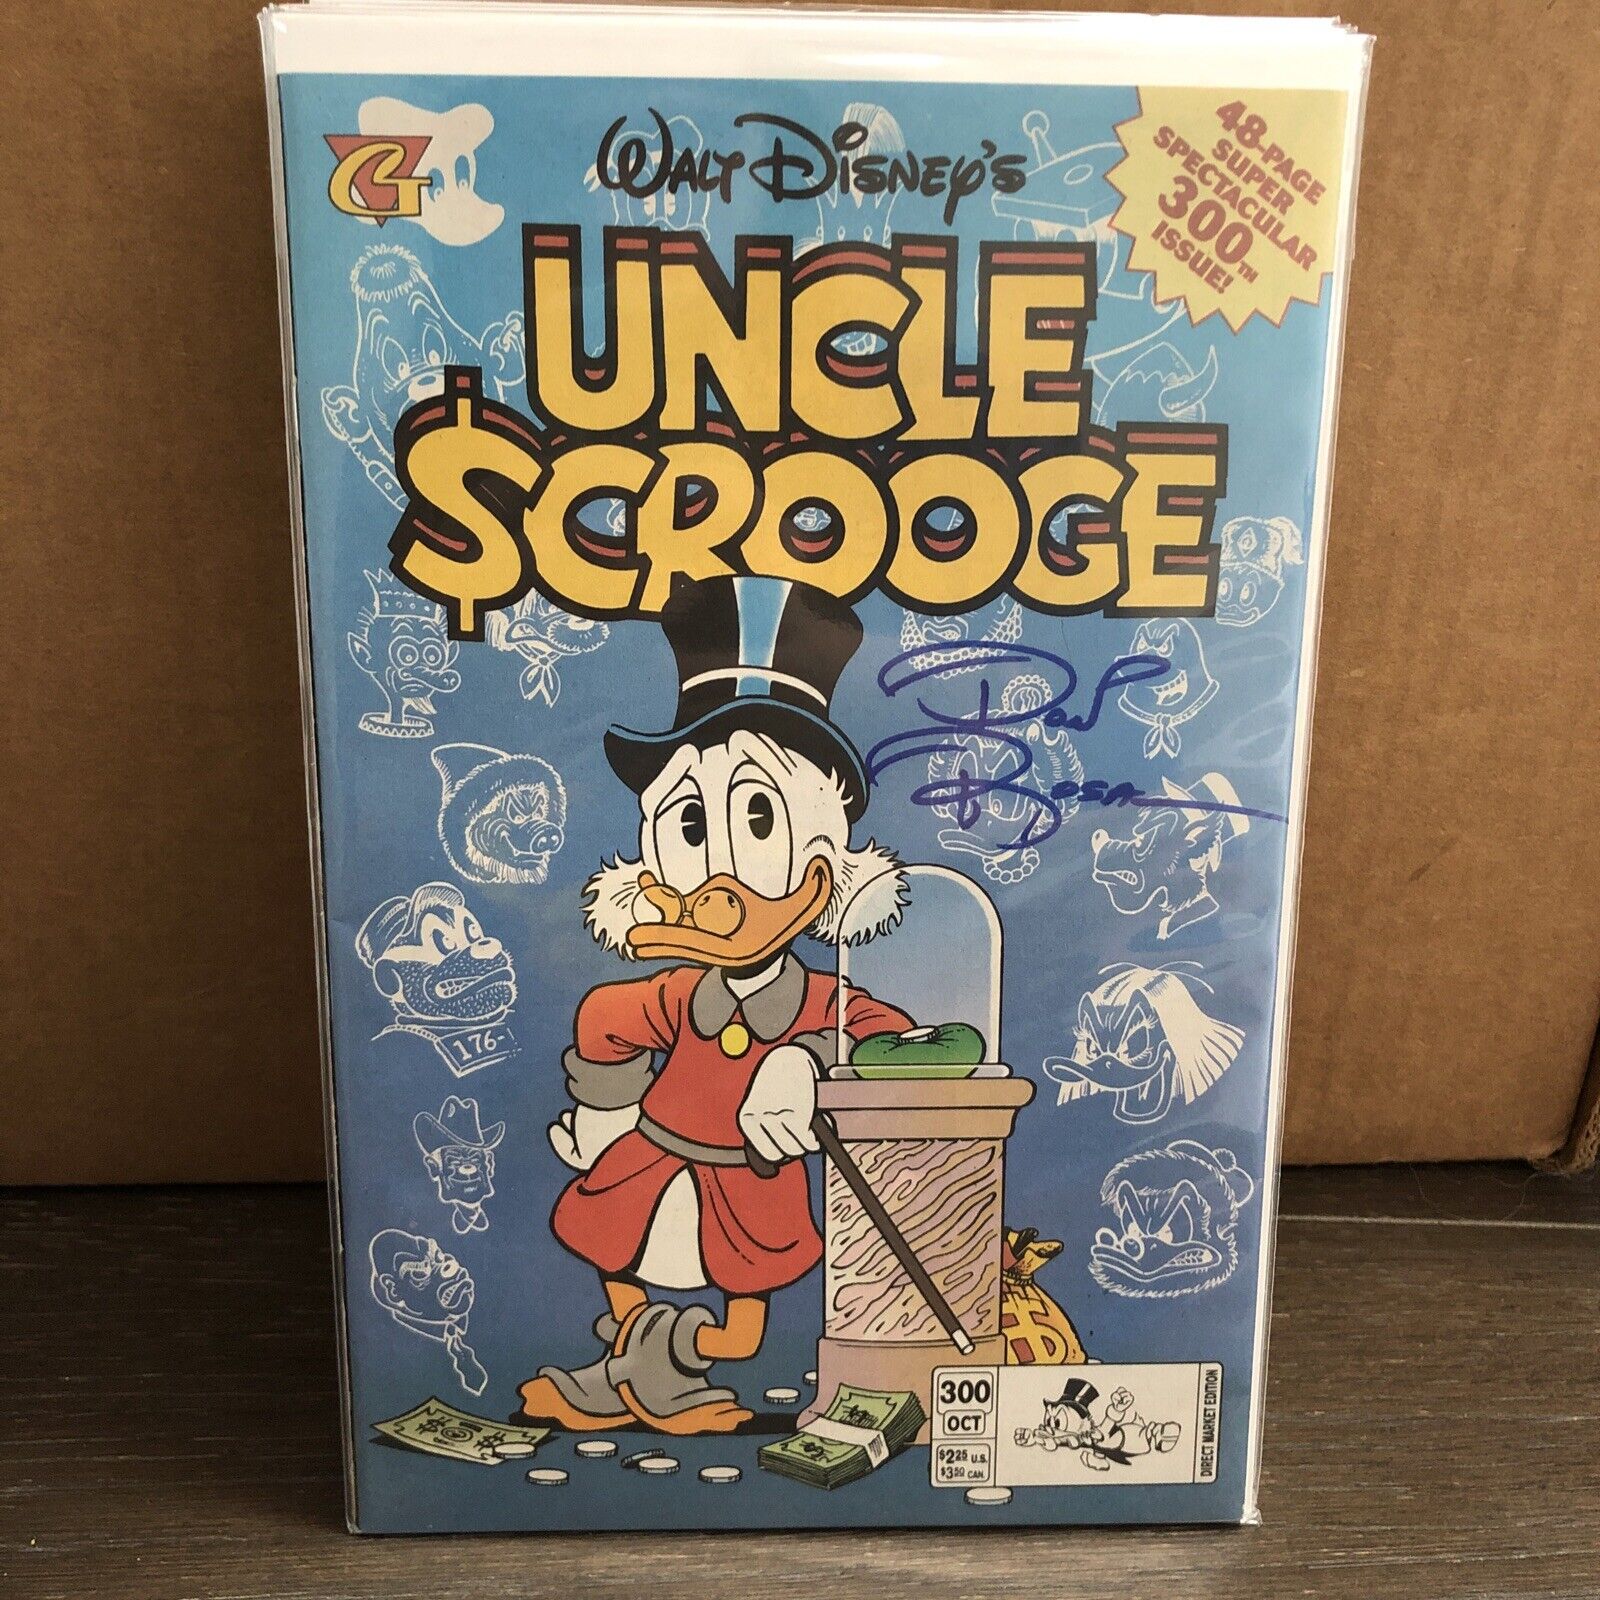 Walt Disney’s Uncle Scrooge #300 Autographed By Don Rosa With COA